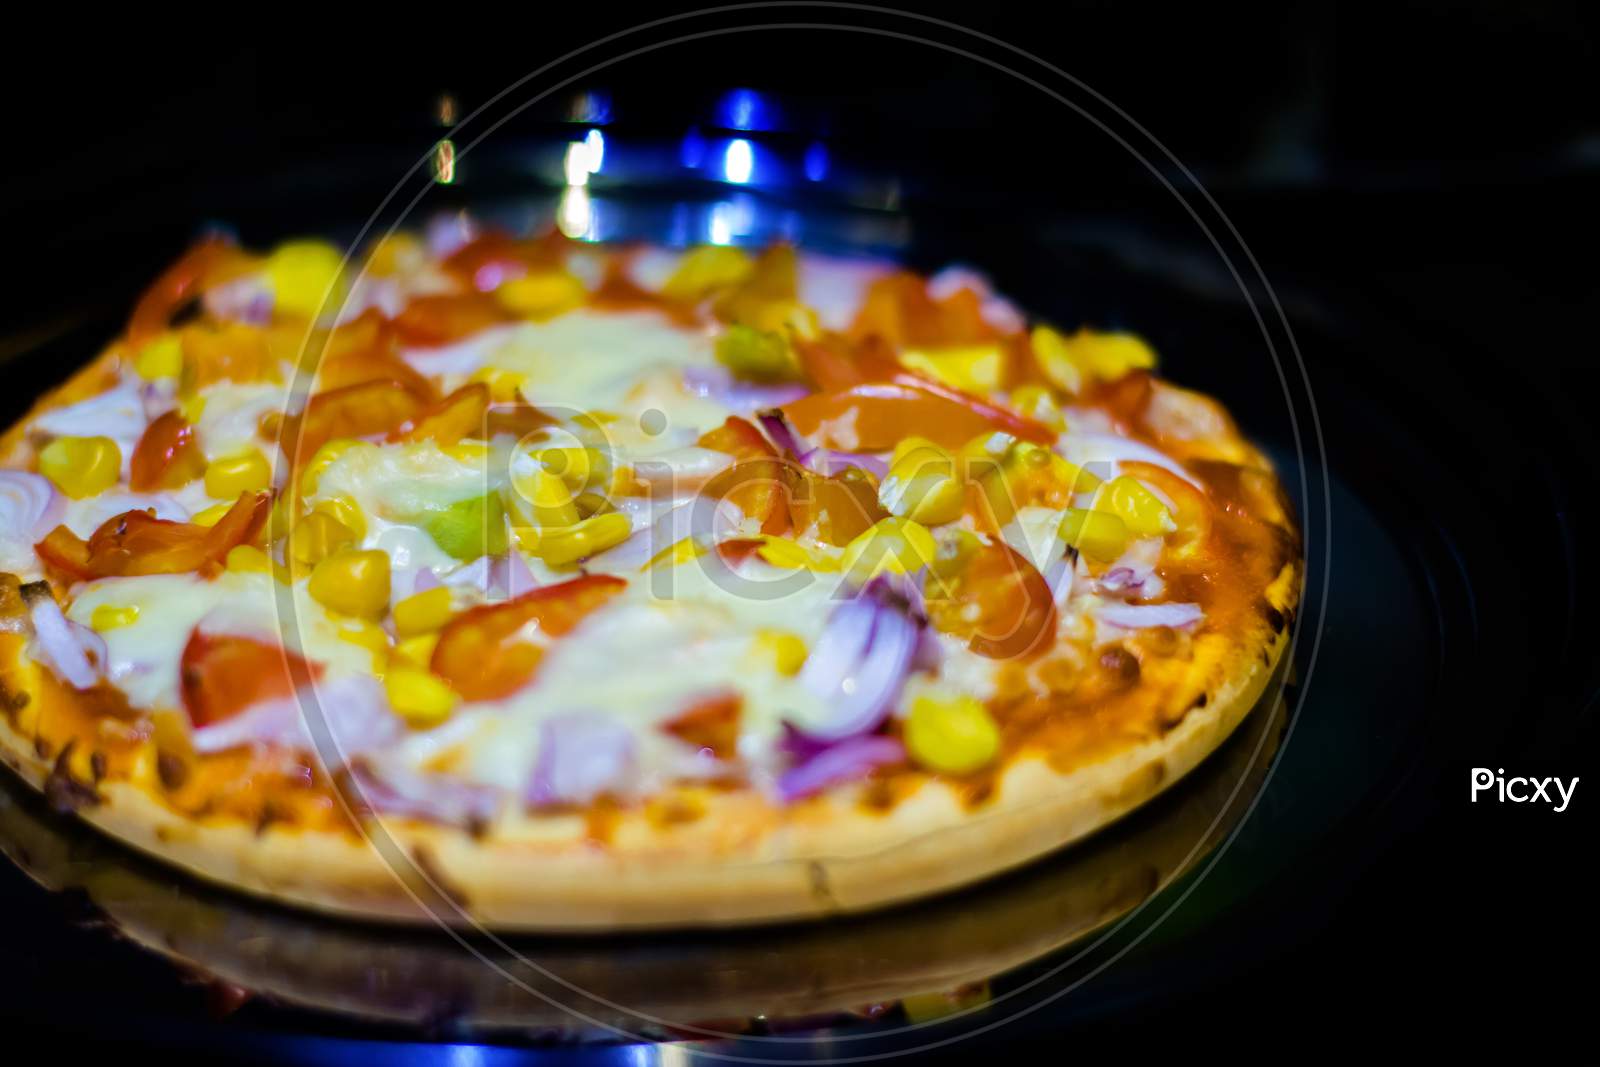 Cutting cheese pizza with Pizza cutter, with tomato, onion, corn toppings, with selective focus in lockdown.